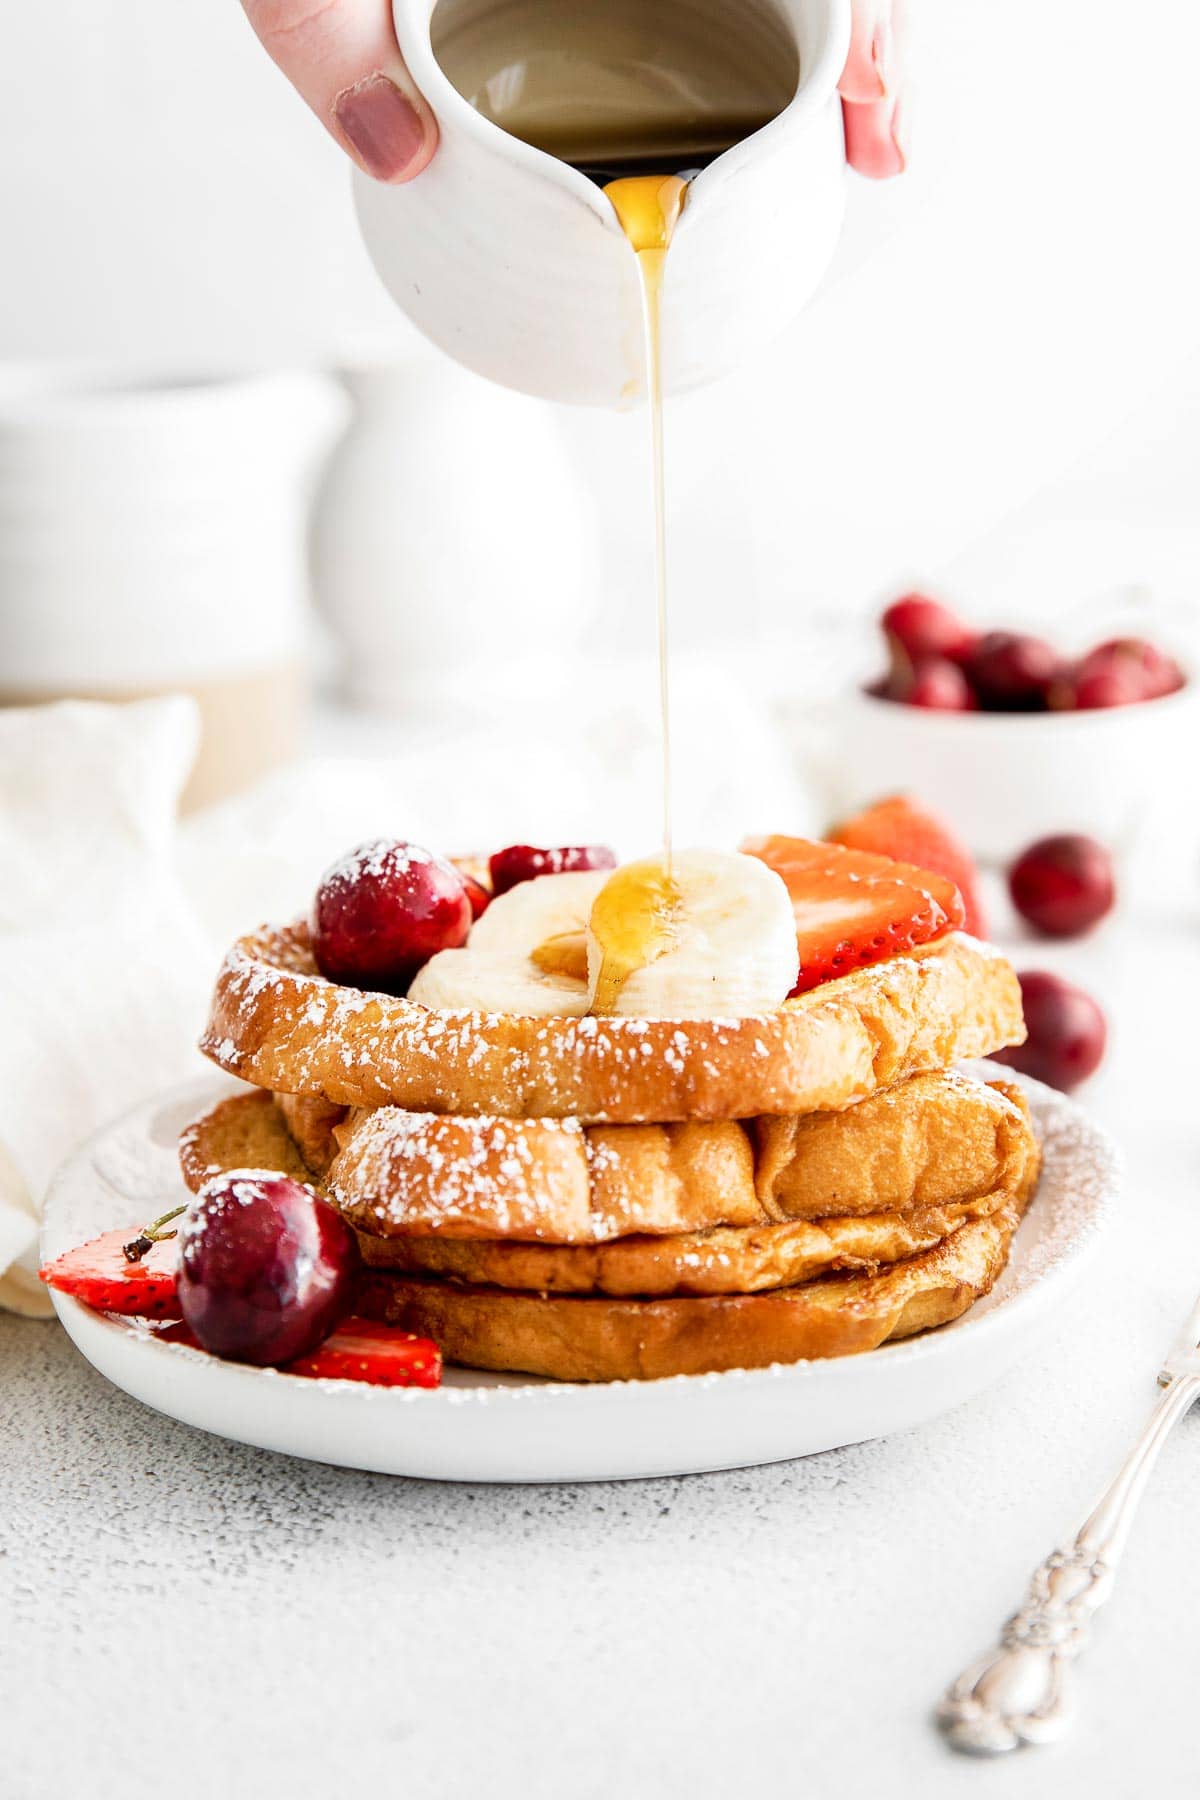 syrup being poured over a stack of french toast topped with slices of banana, strawberries and cherries